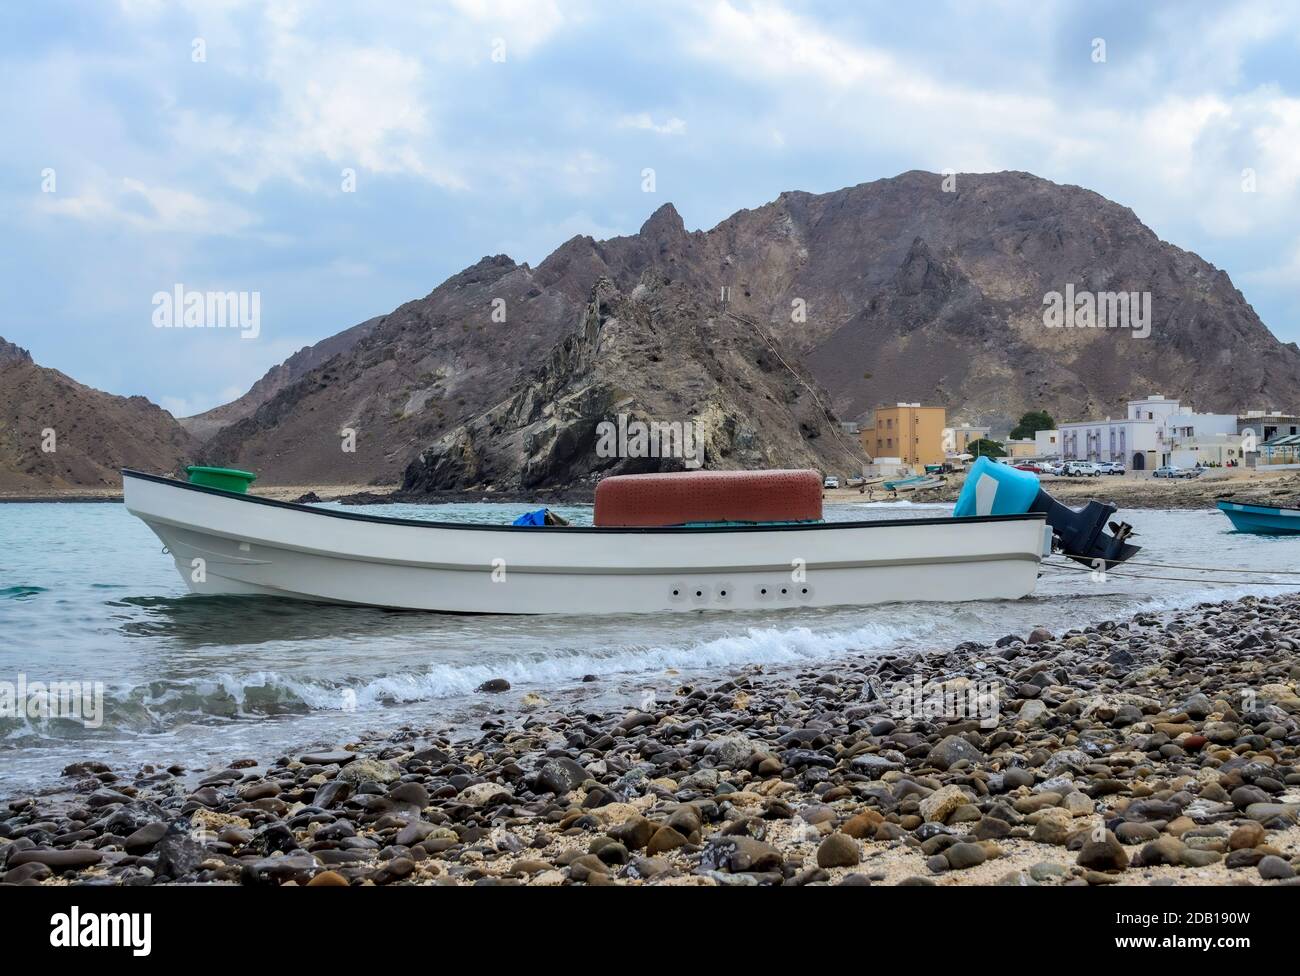 Small docked fishing boat on Darsait Beach, Muscat, Oman. Mountains and fishing village in the background Stock Photo